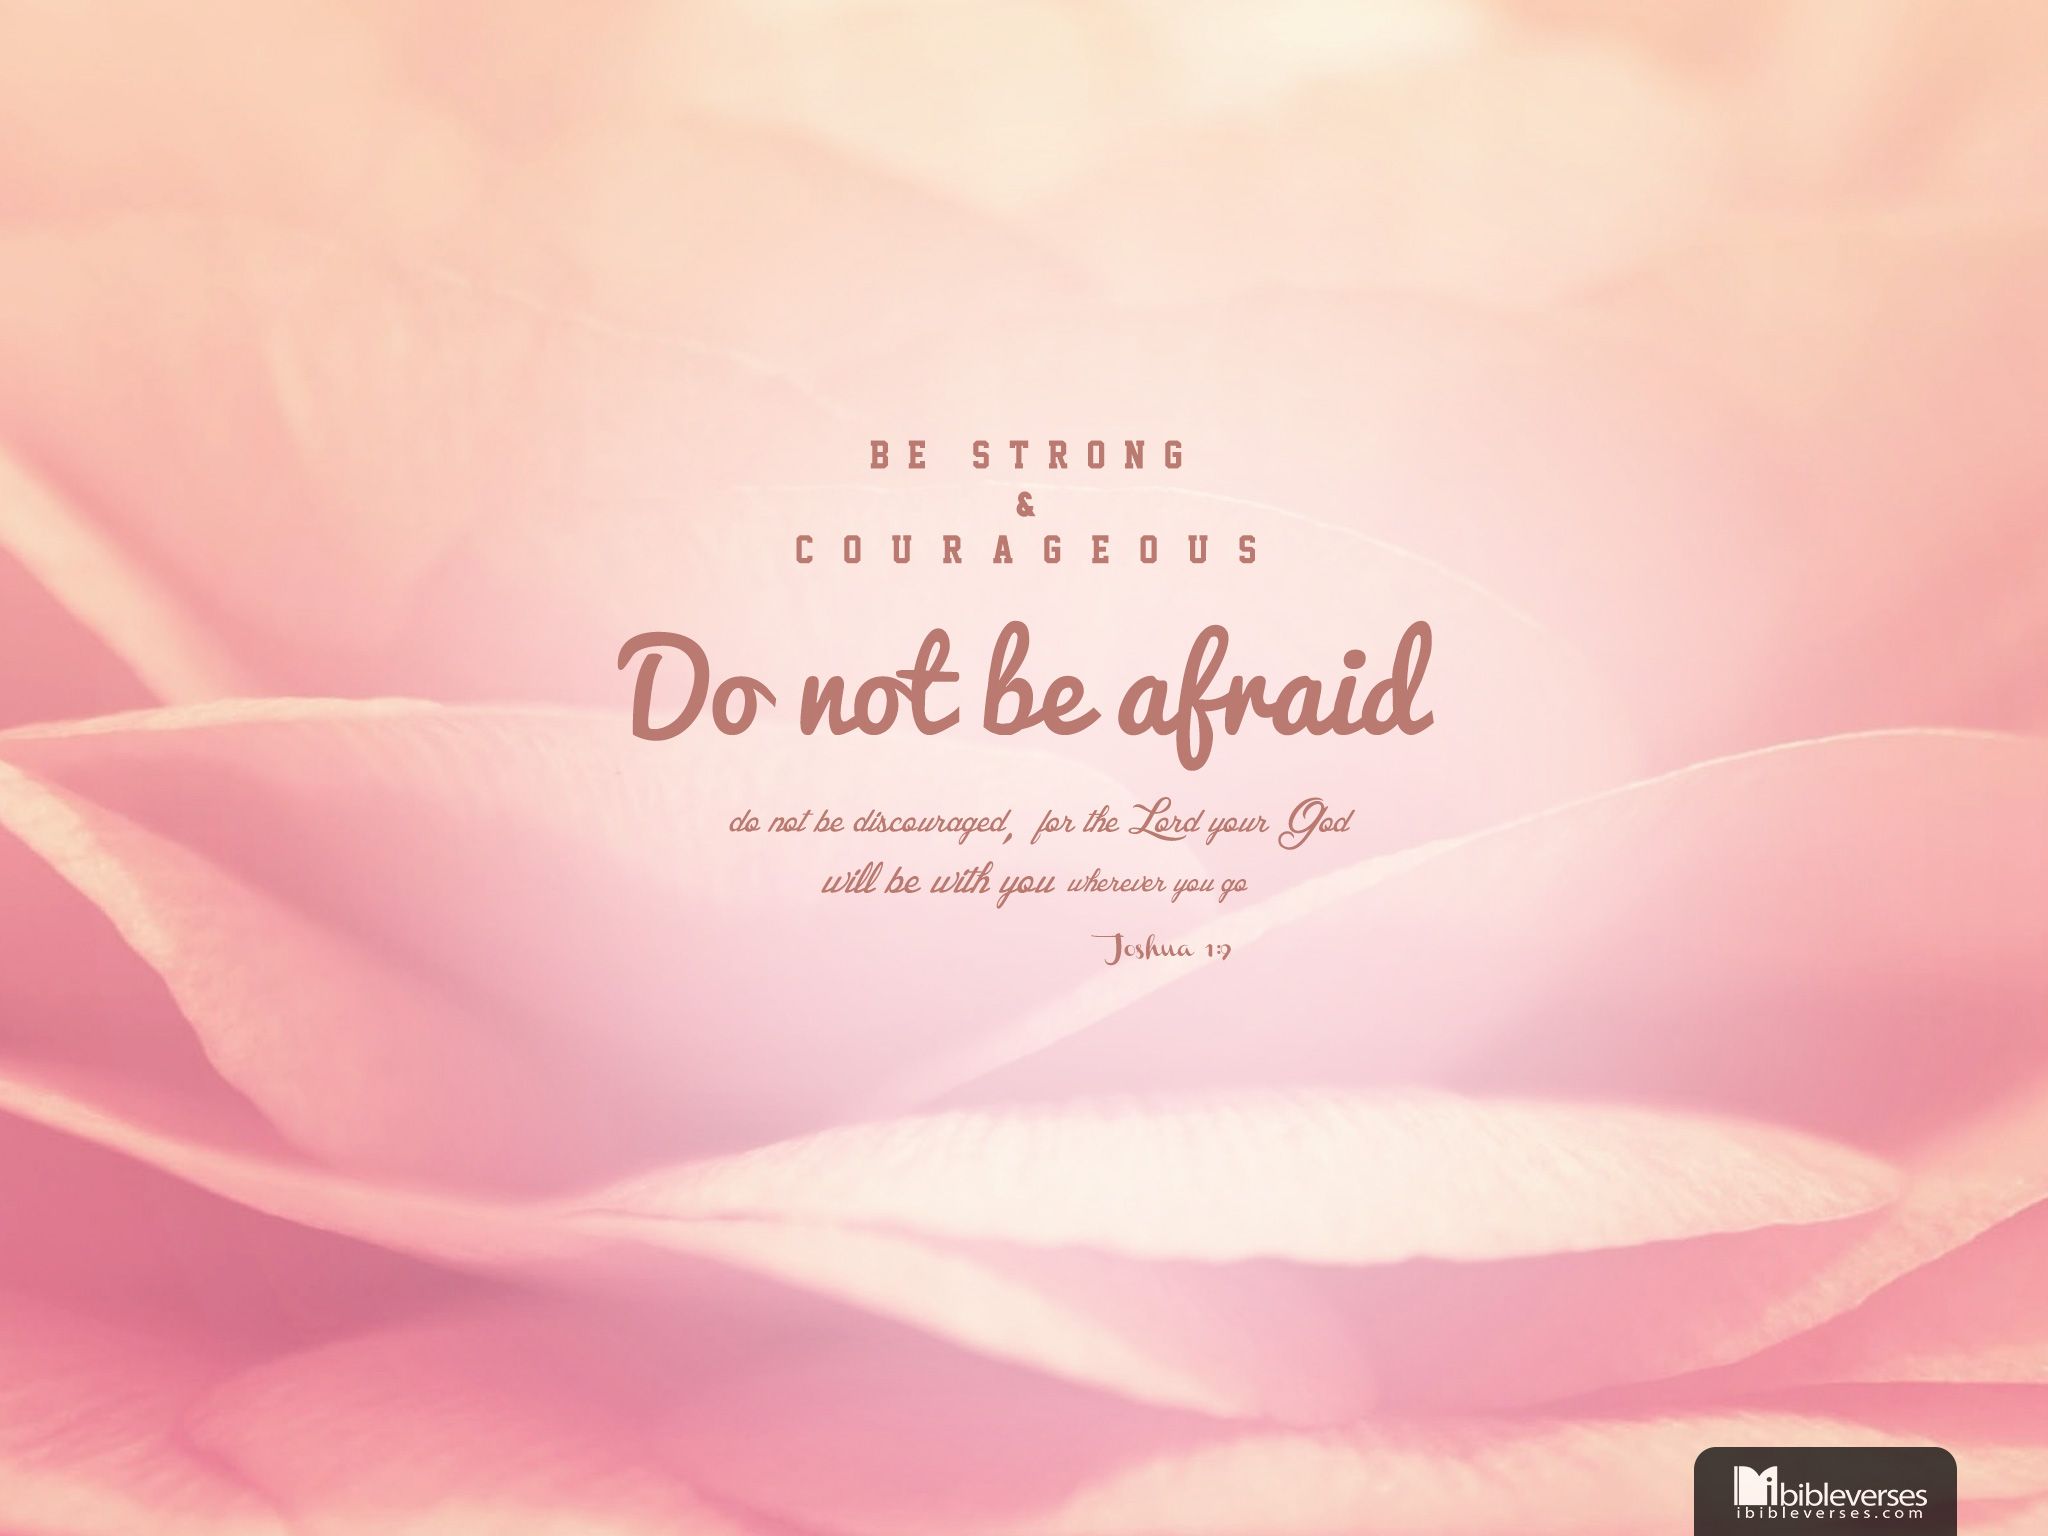 DOWNLOAD // Christian Wallpaper with Words of Faith - Christianbook.com Blog